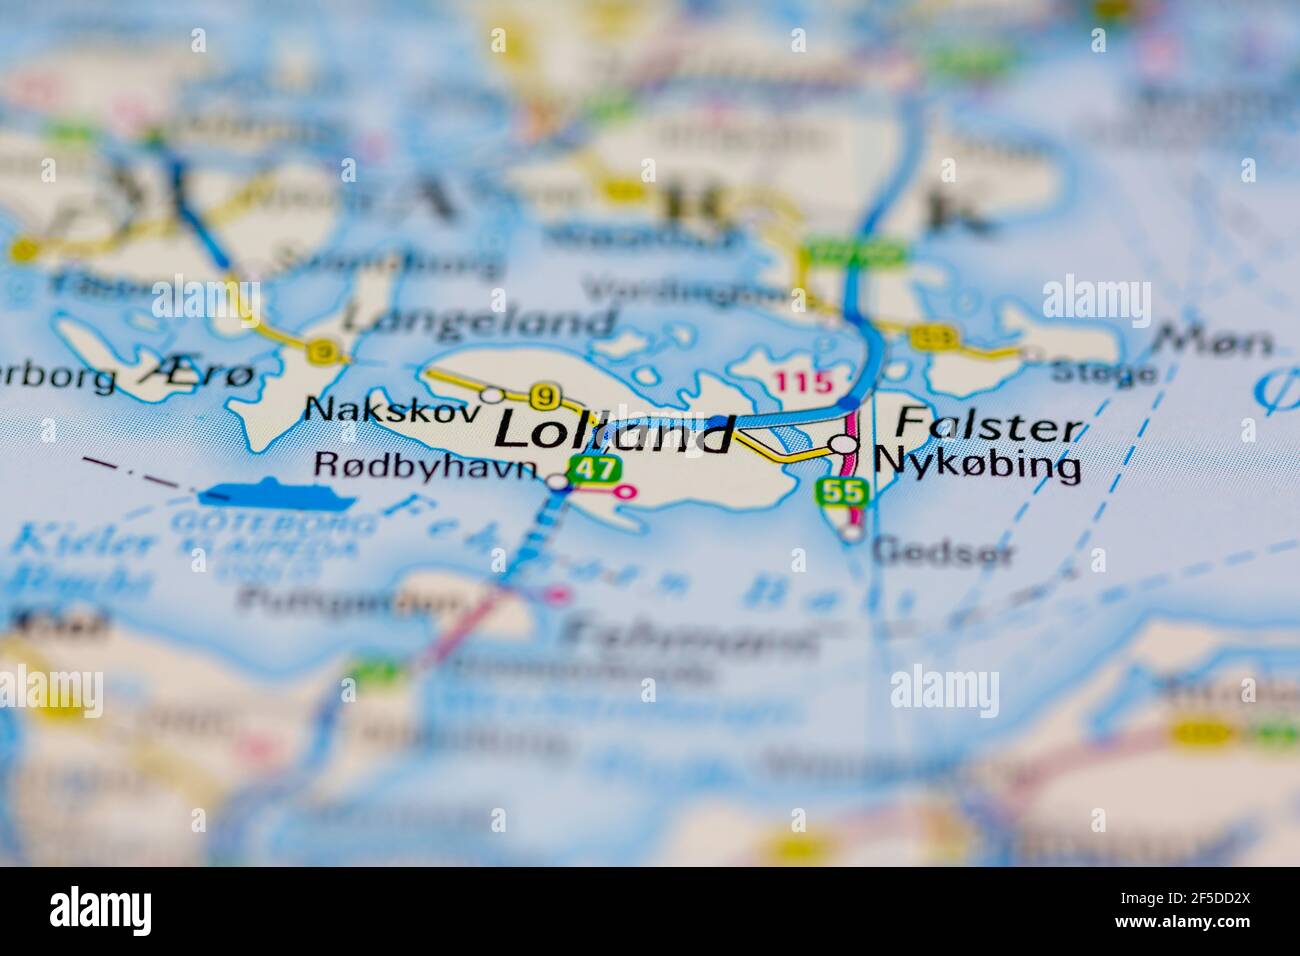 Lolland and surrounding areas Shown on a Geography map or road map Stock Photo